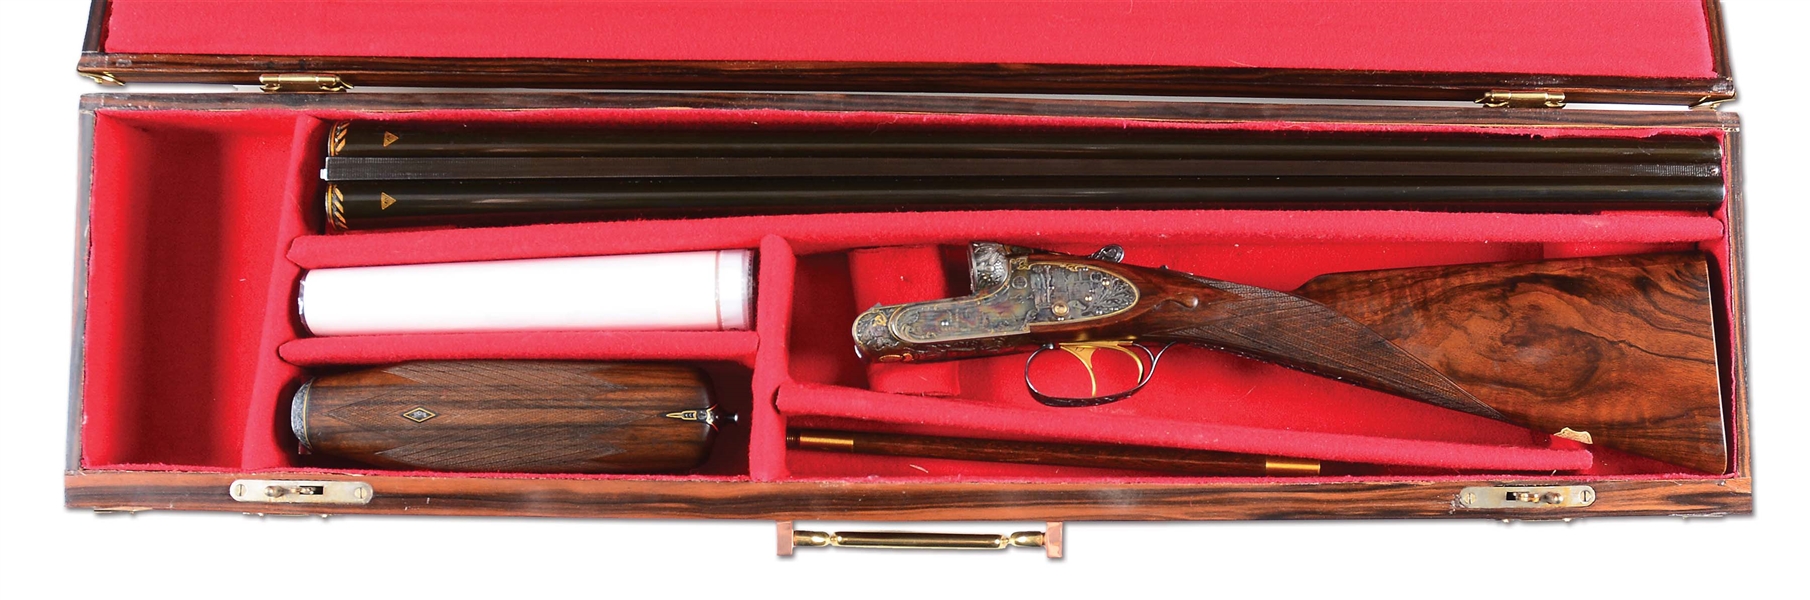 (M) THE MOST IMPORTANT 20TH CENTURY RUSSIAN SHOTGUN EXTANT - A PURDEY TYPE ACTION TULA ARMORY VOSTOCK M-11 MODEL 12 BORE ATTRIBUTED TO NIKITA KHRUSHCHEV WITH INCREDIBLE CASING.